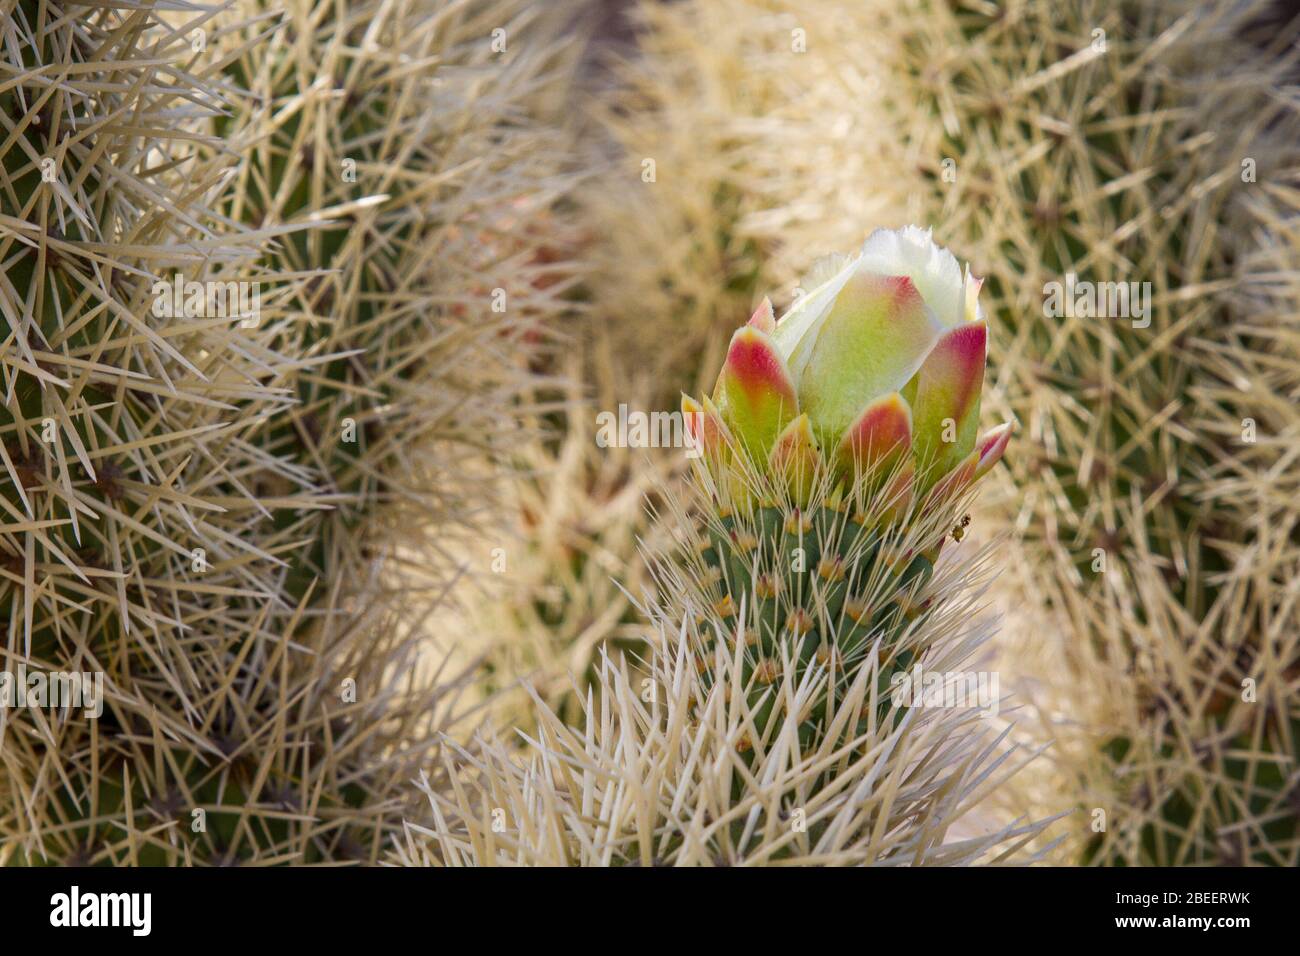 A single cactus bud sits among spines waiting to bloom on a cactus in Spring in Puerto Peñasco, Sonora Mexico. Stock Photo